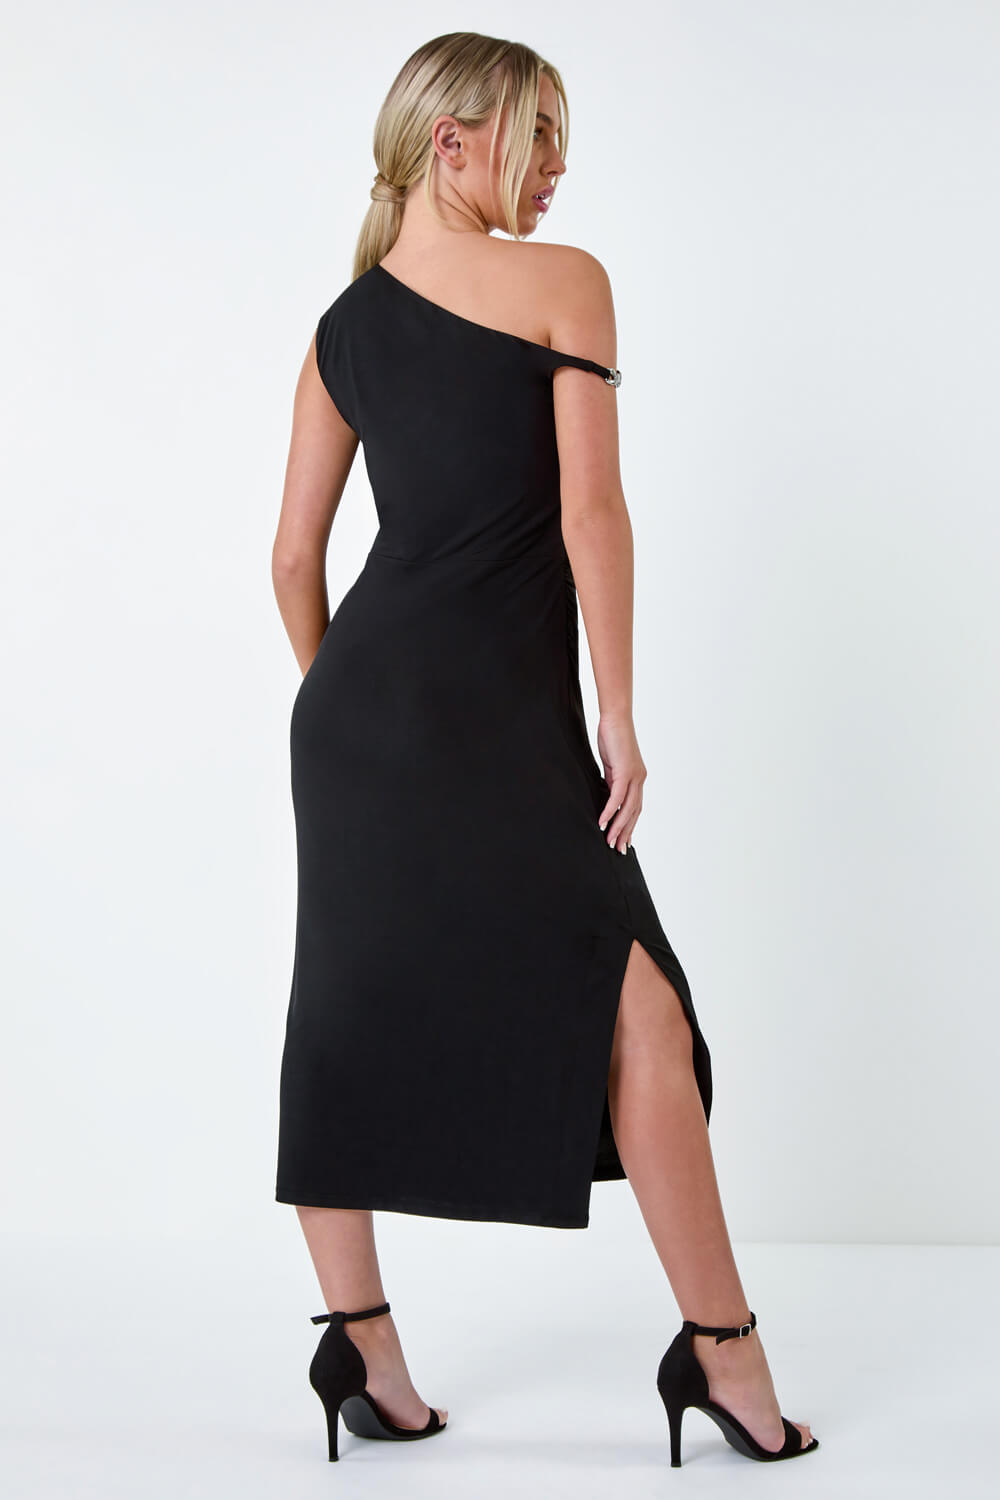 Black Petite Twist Detail Ruched Stretch Dress, Image 3 of 5